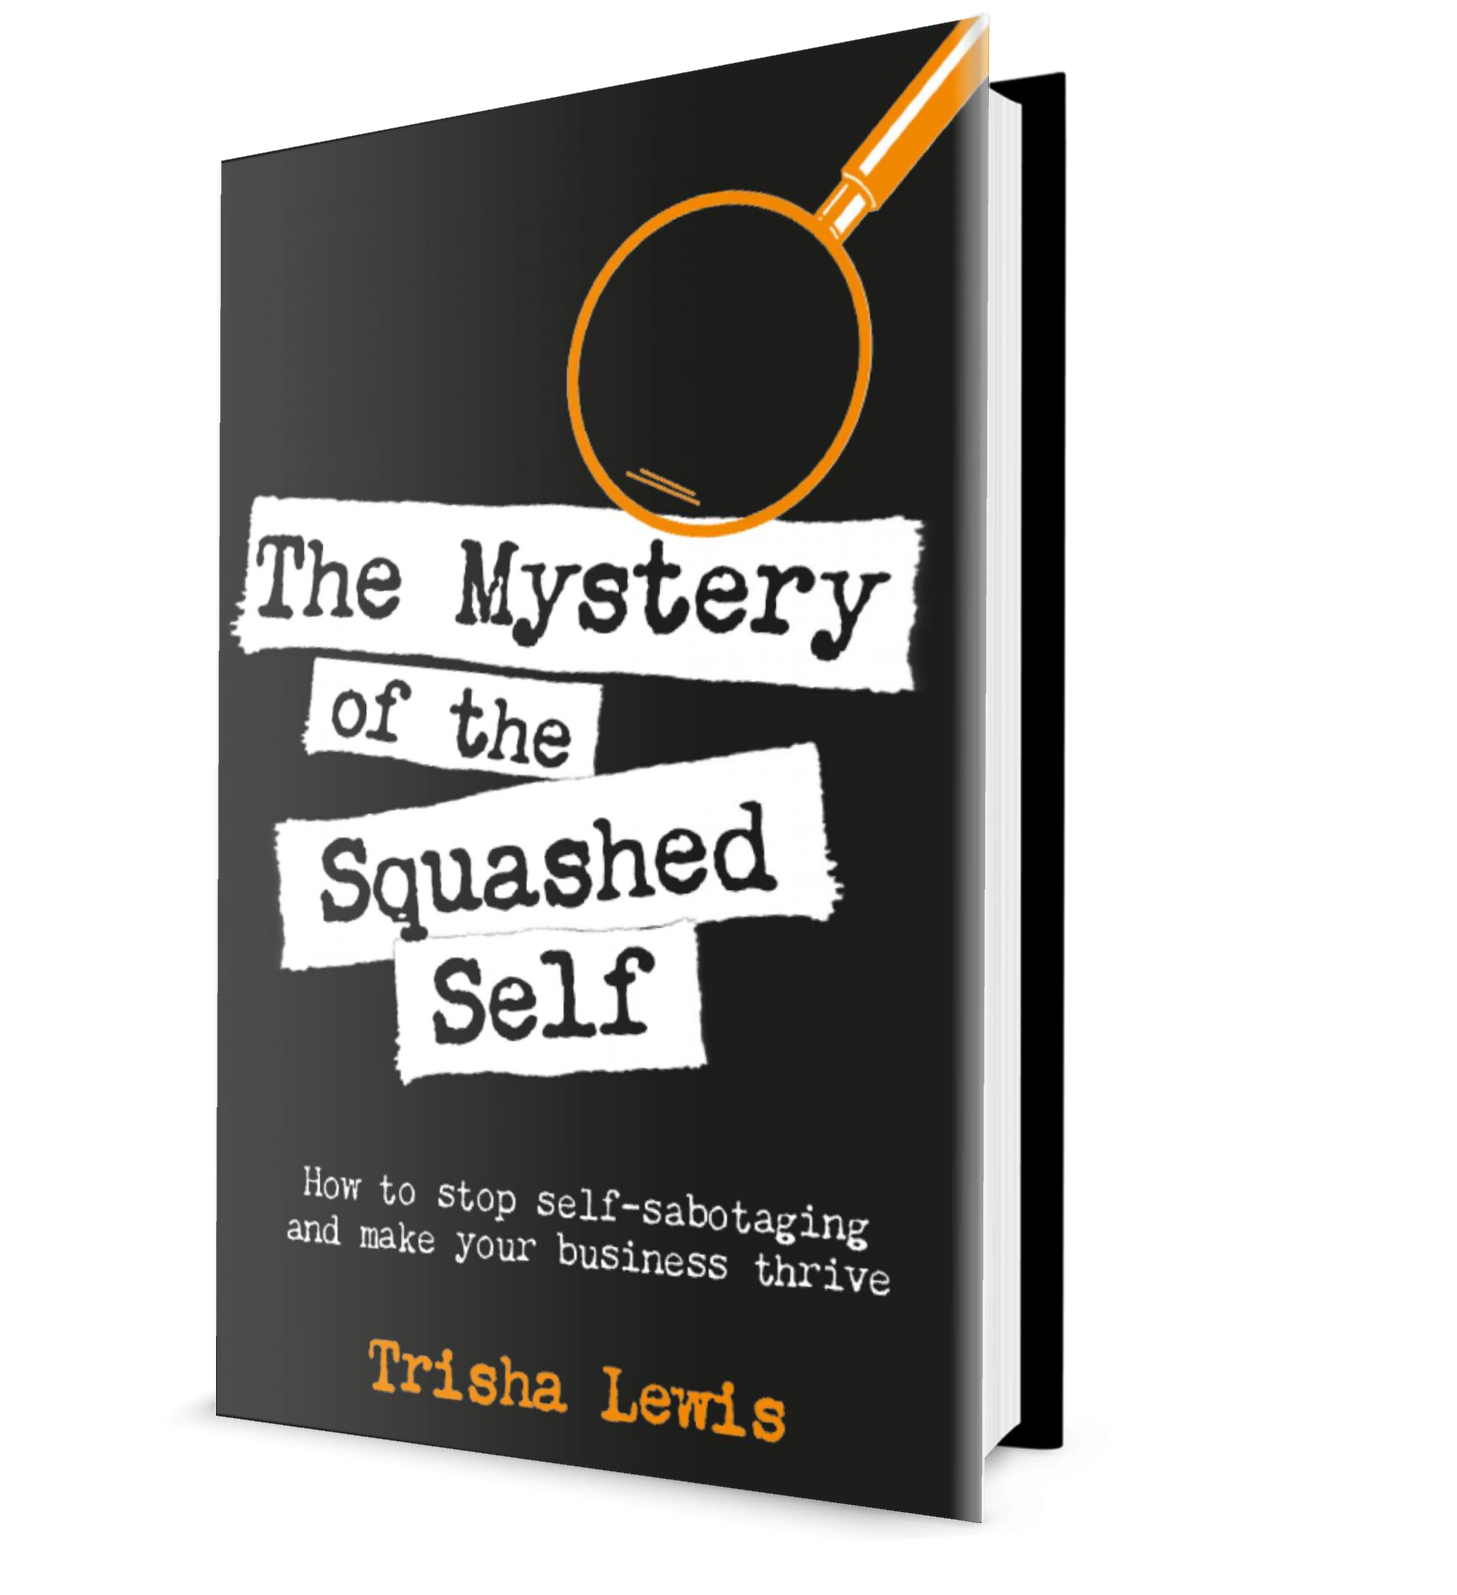 The Mystery of the Squashed Self Book cover